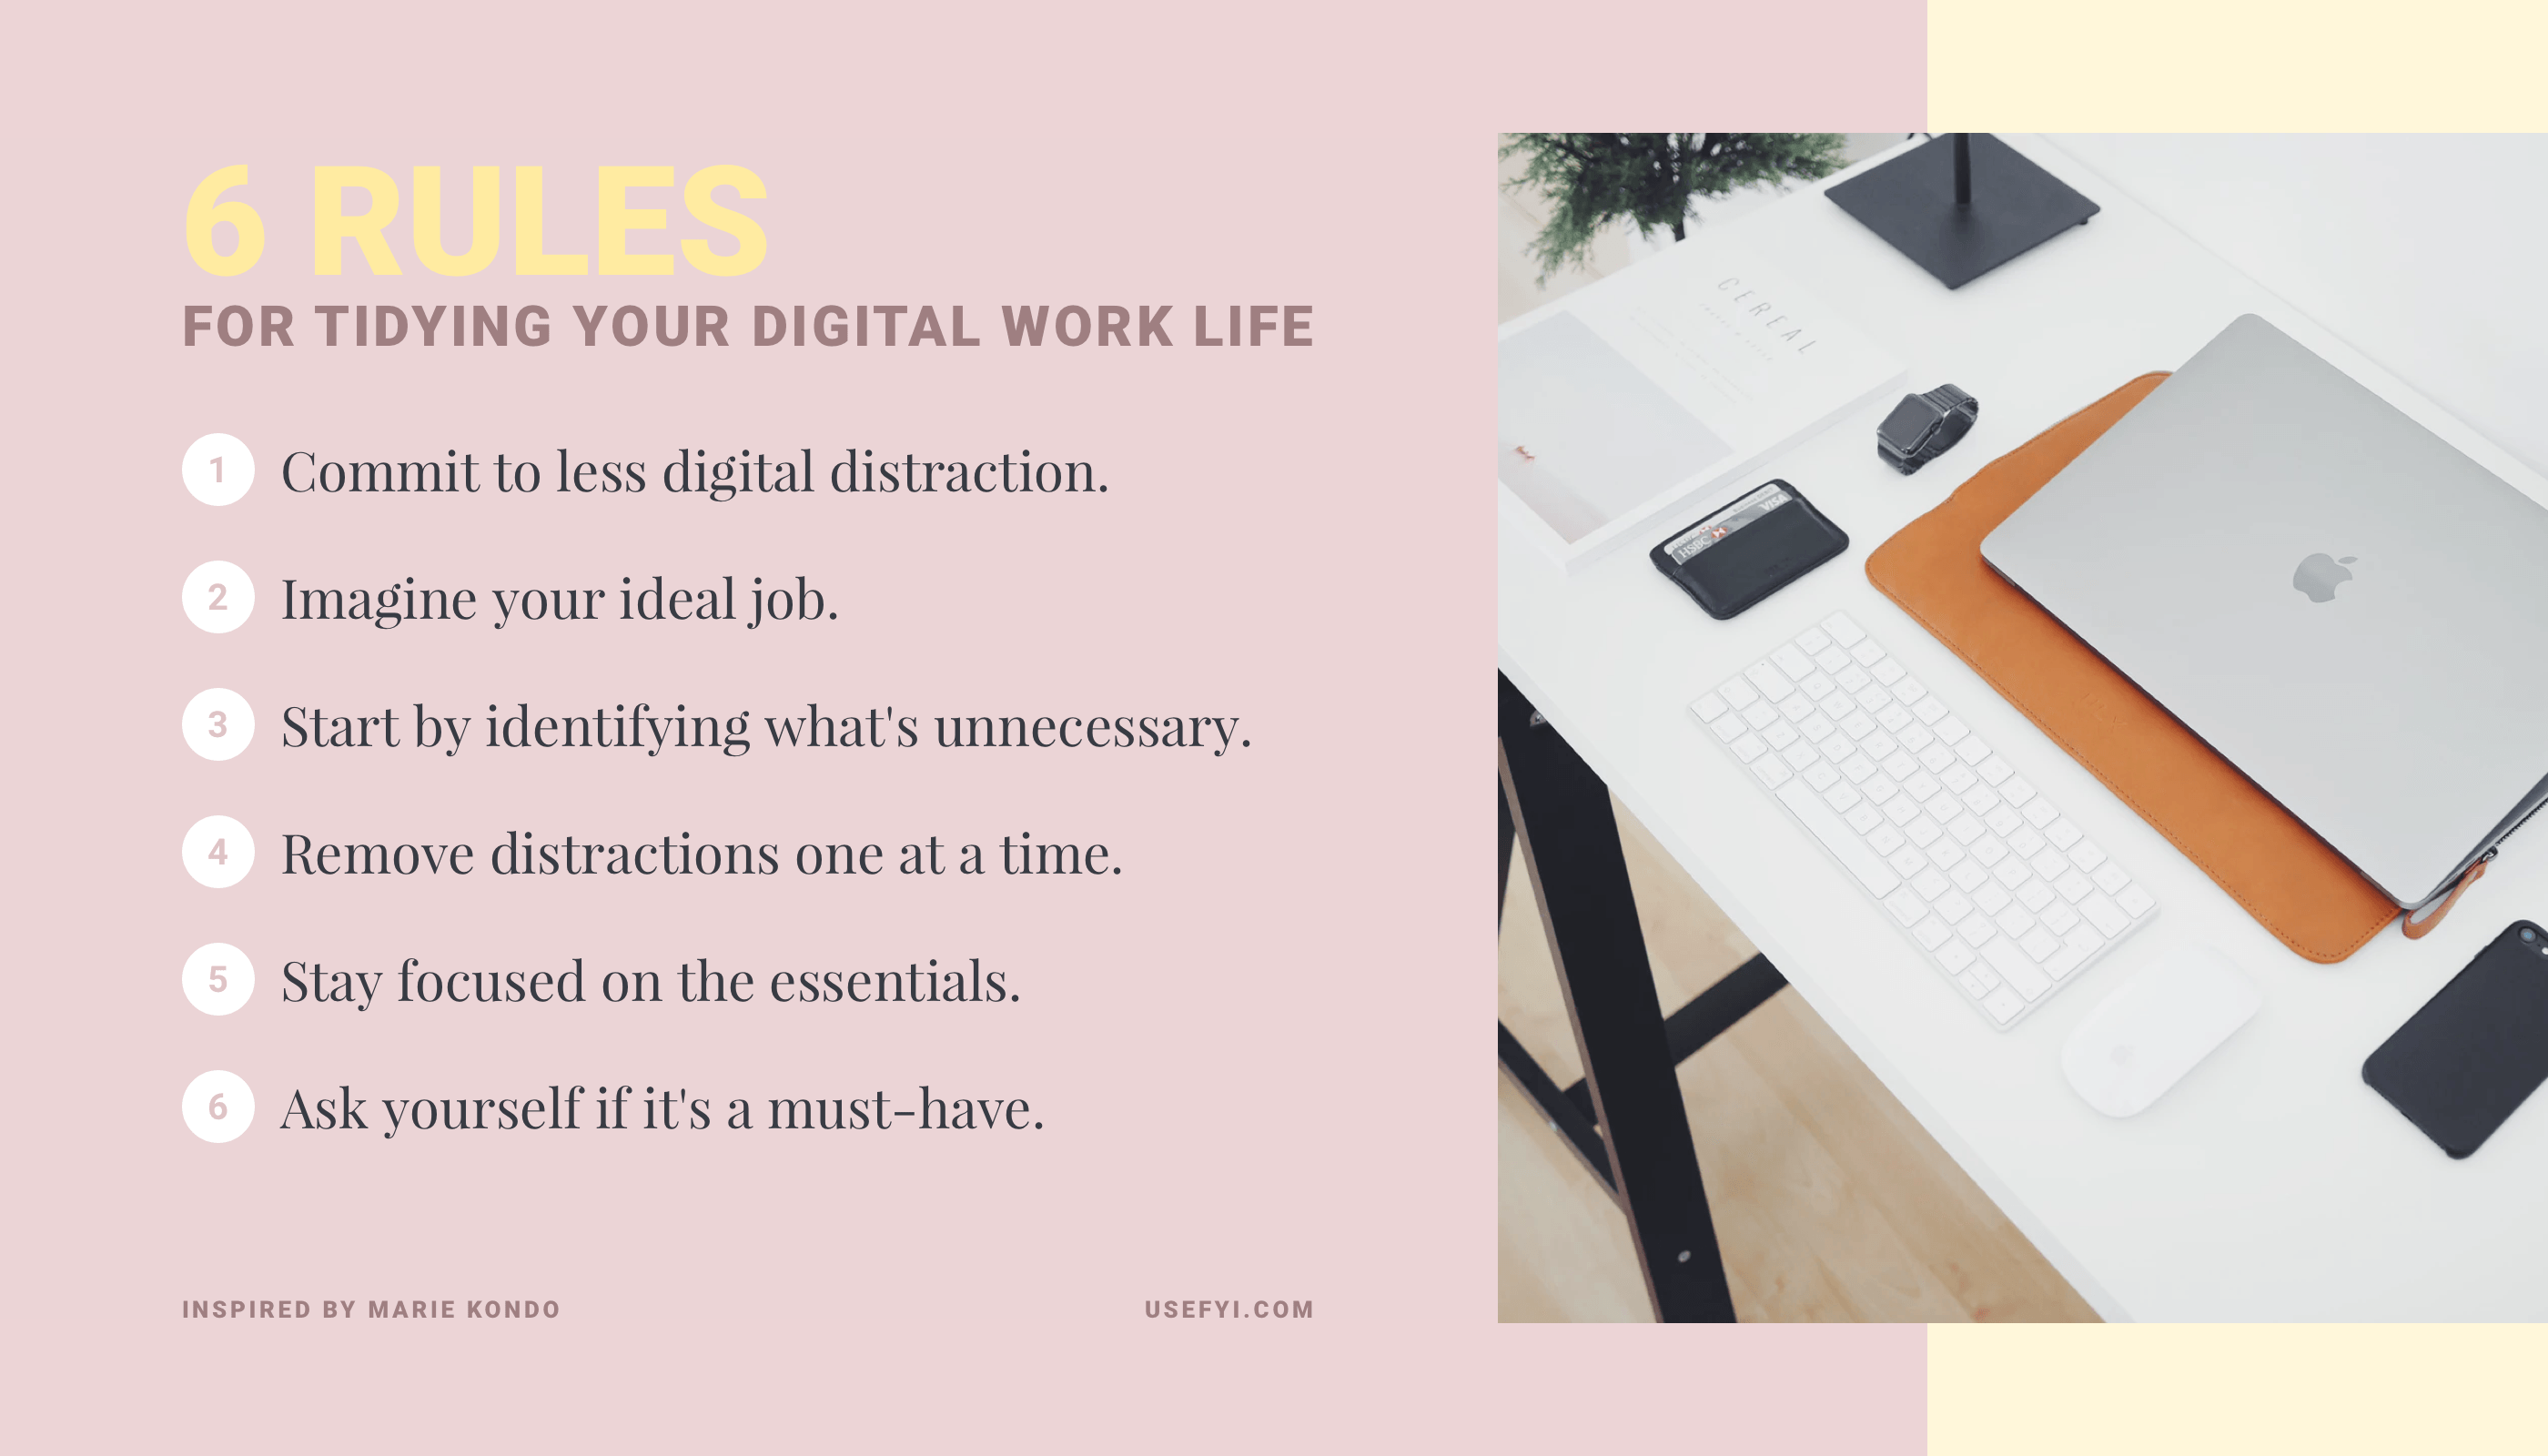 6 rules for tidying up your digital work life